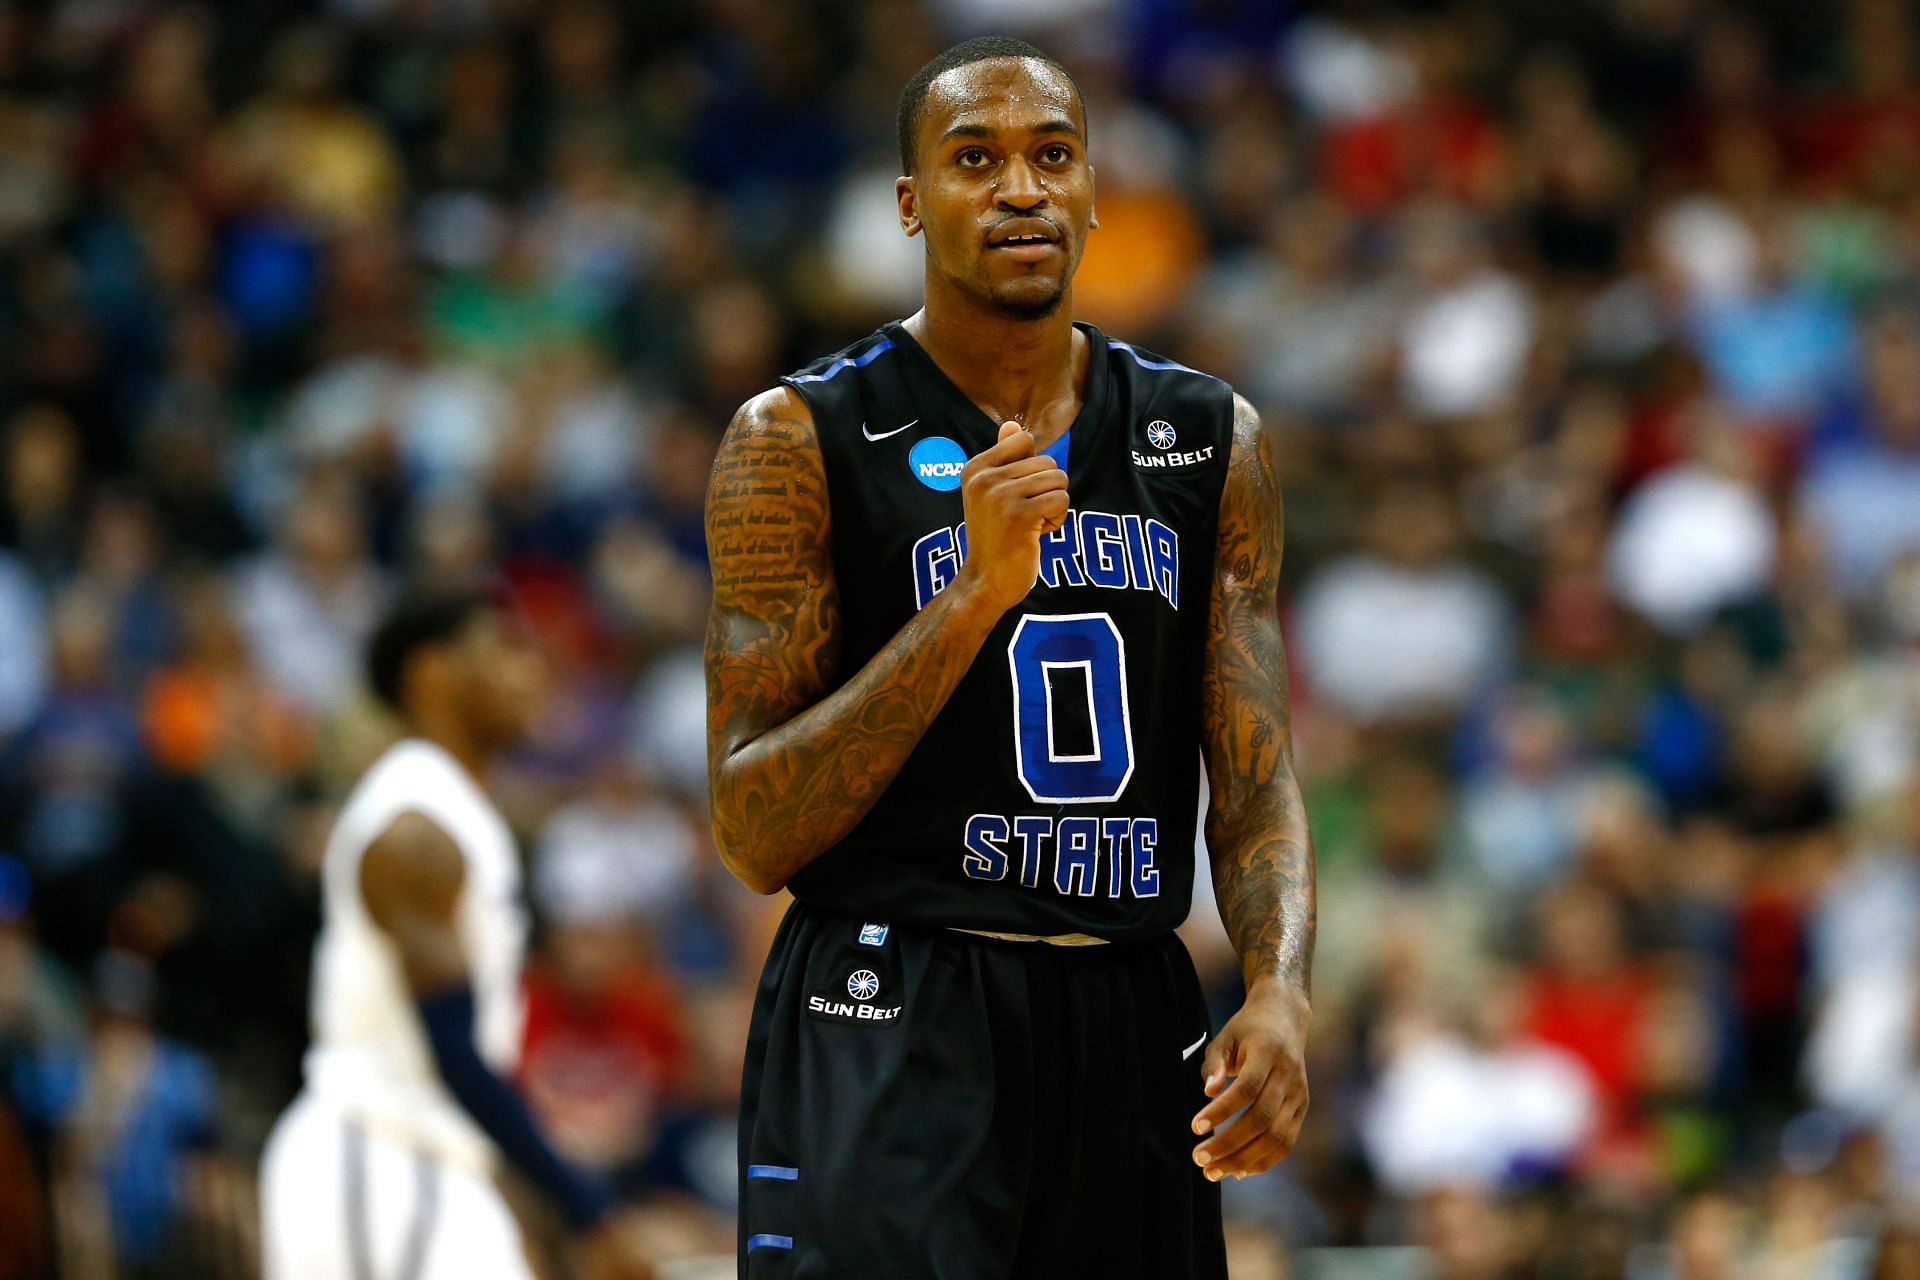 Kevin Ware, shown here with Georgia State, suffered a horrific injury while playing for Louisville.